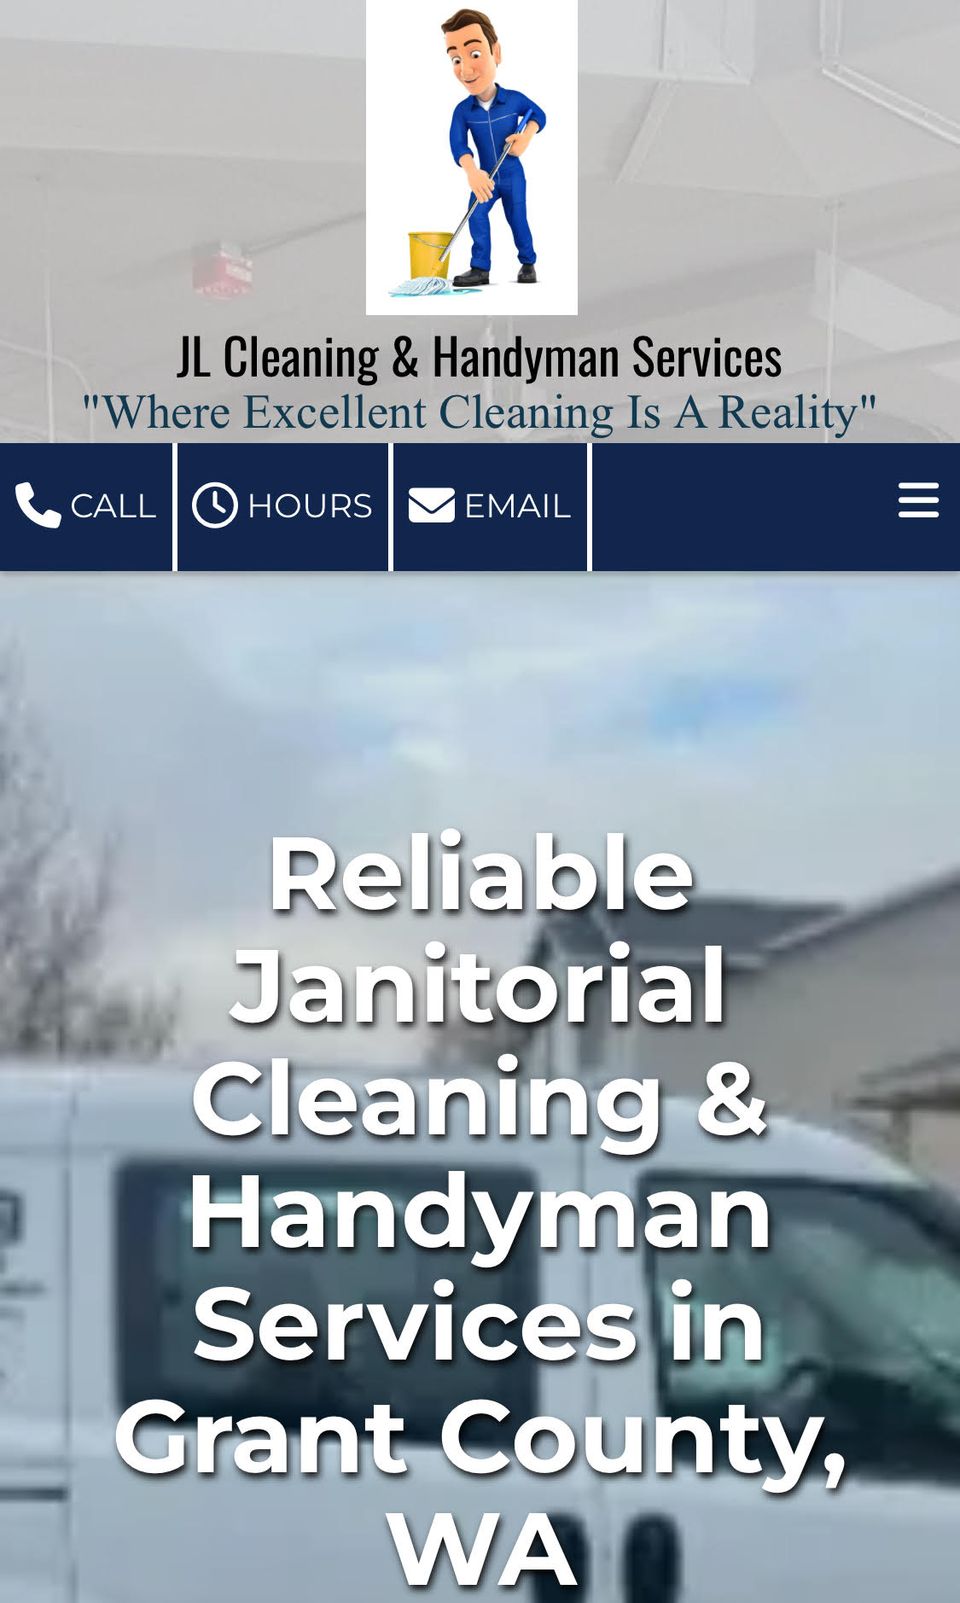 Jl cleaning home